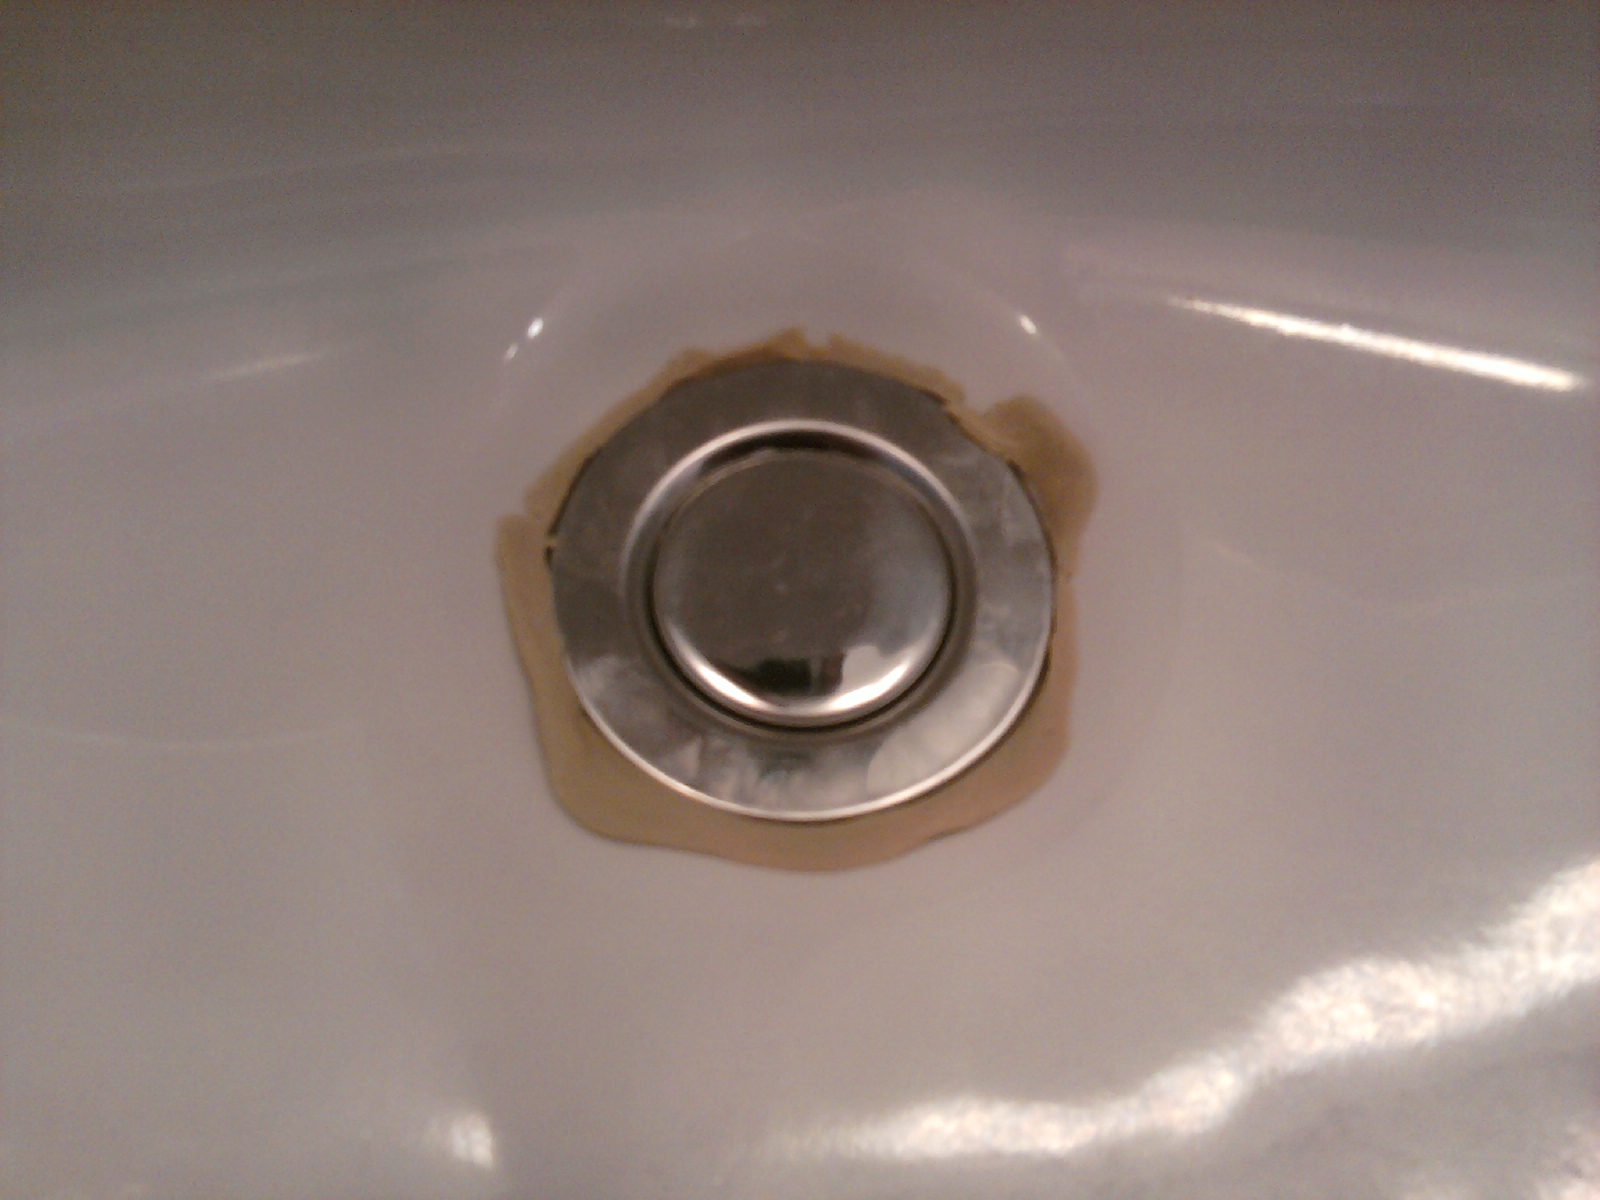 Excess Putty Should Be Seen All-Around Drain